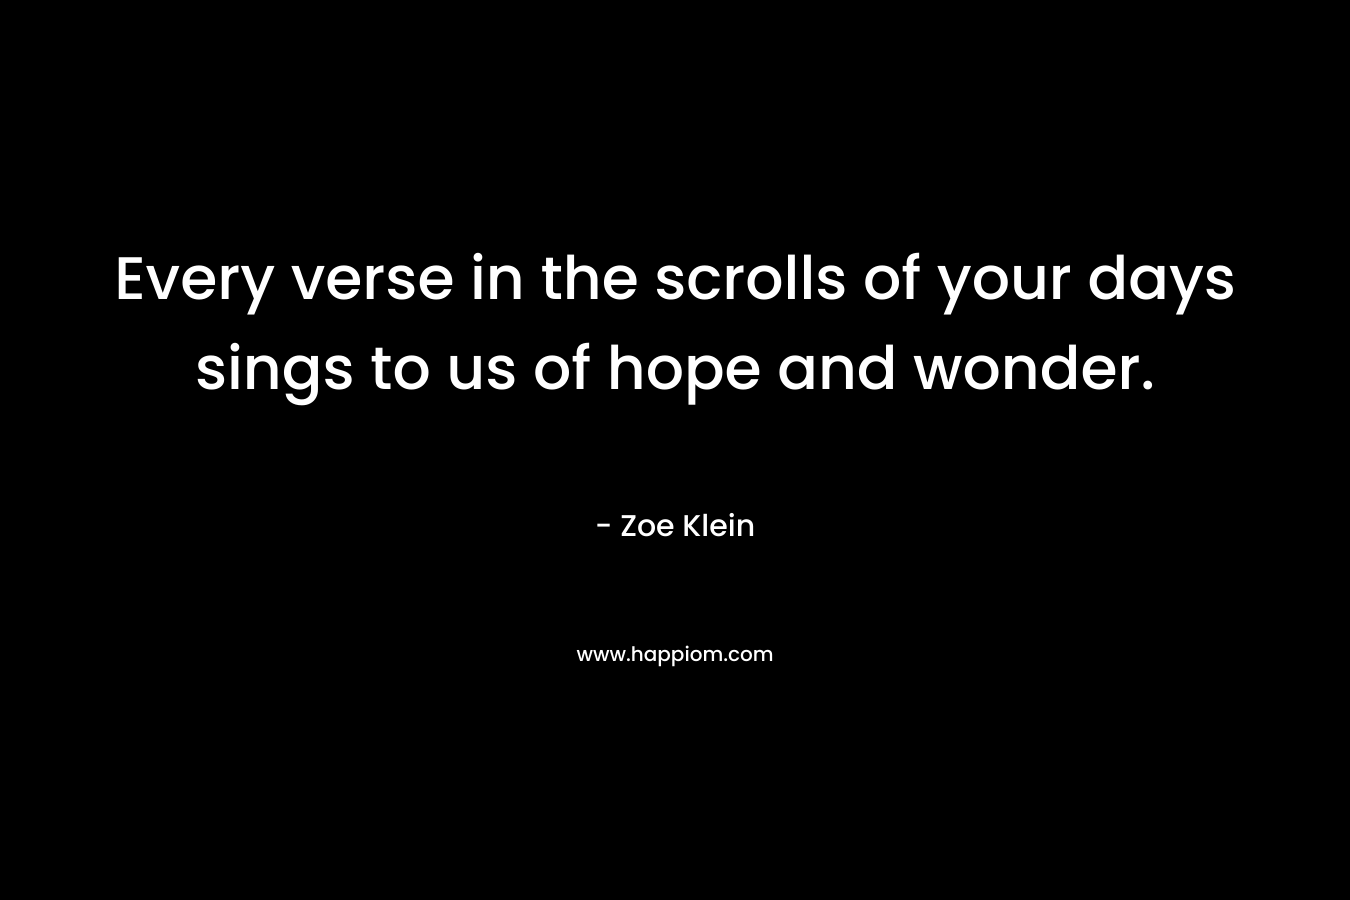 Every verse in the scrolls of your days sings to us of hope and wonder. – Zoe Klein